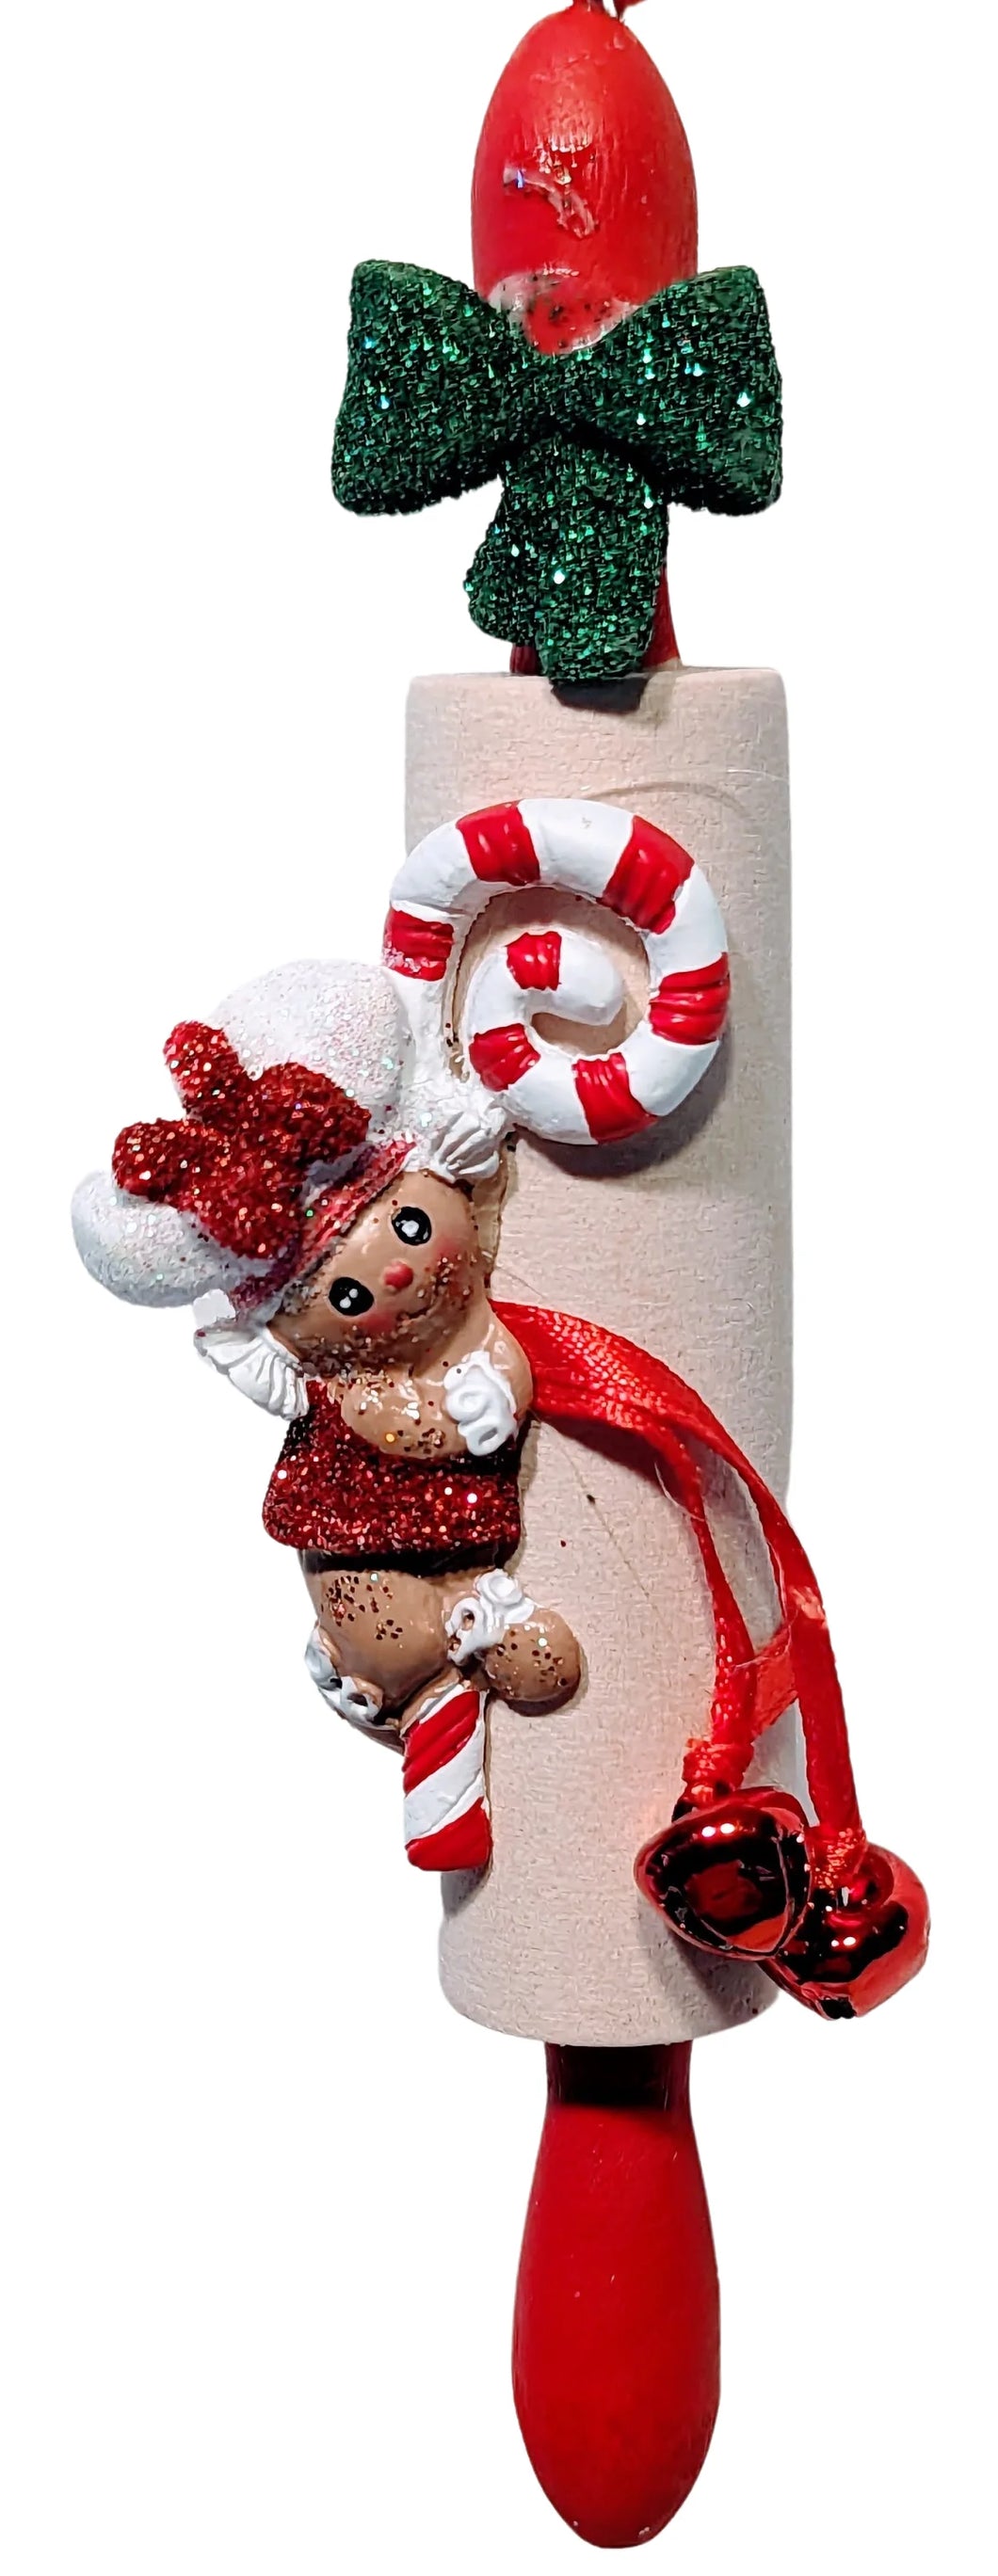 Gingerbread Girl on a Rolling Pin Ornament